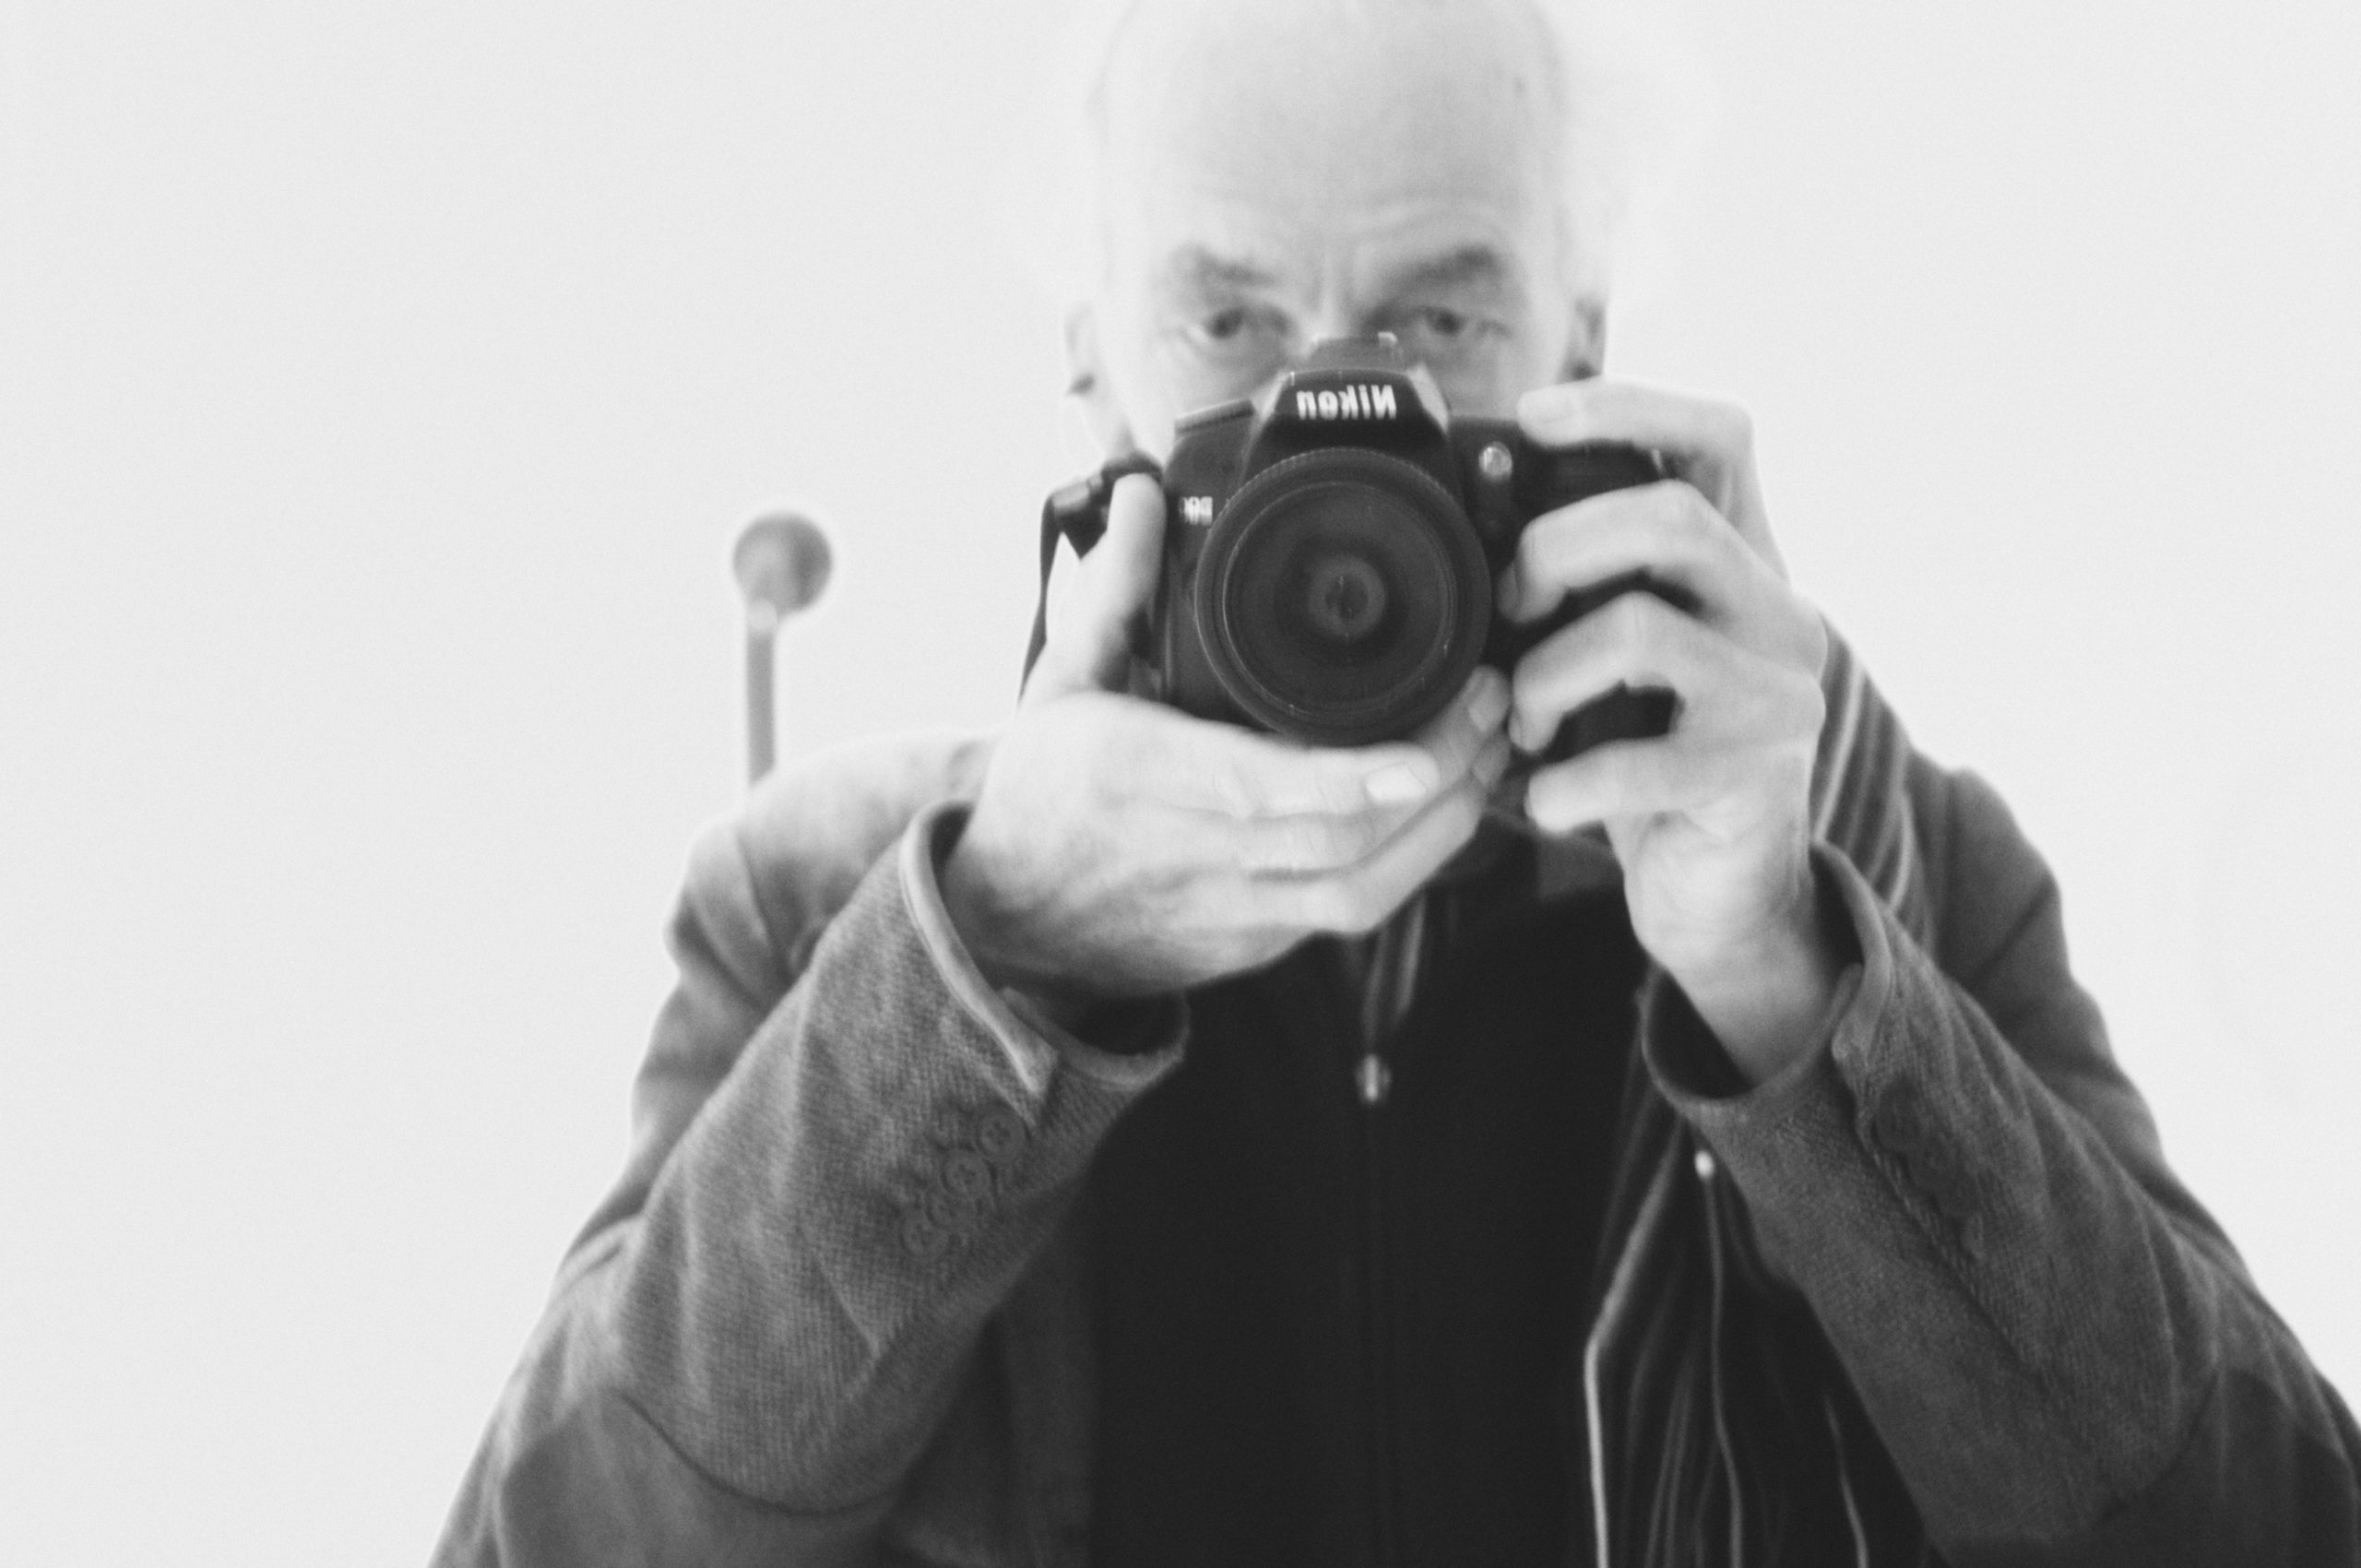 A black and white photograph of the photographer David Bailey holding a camera.